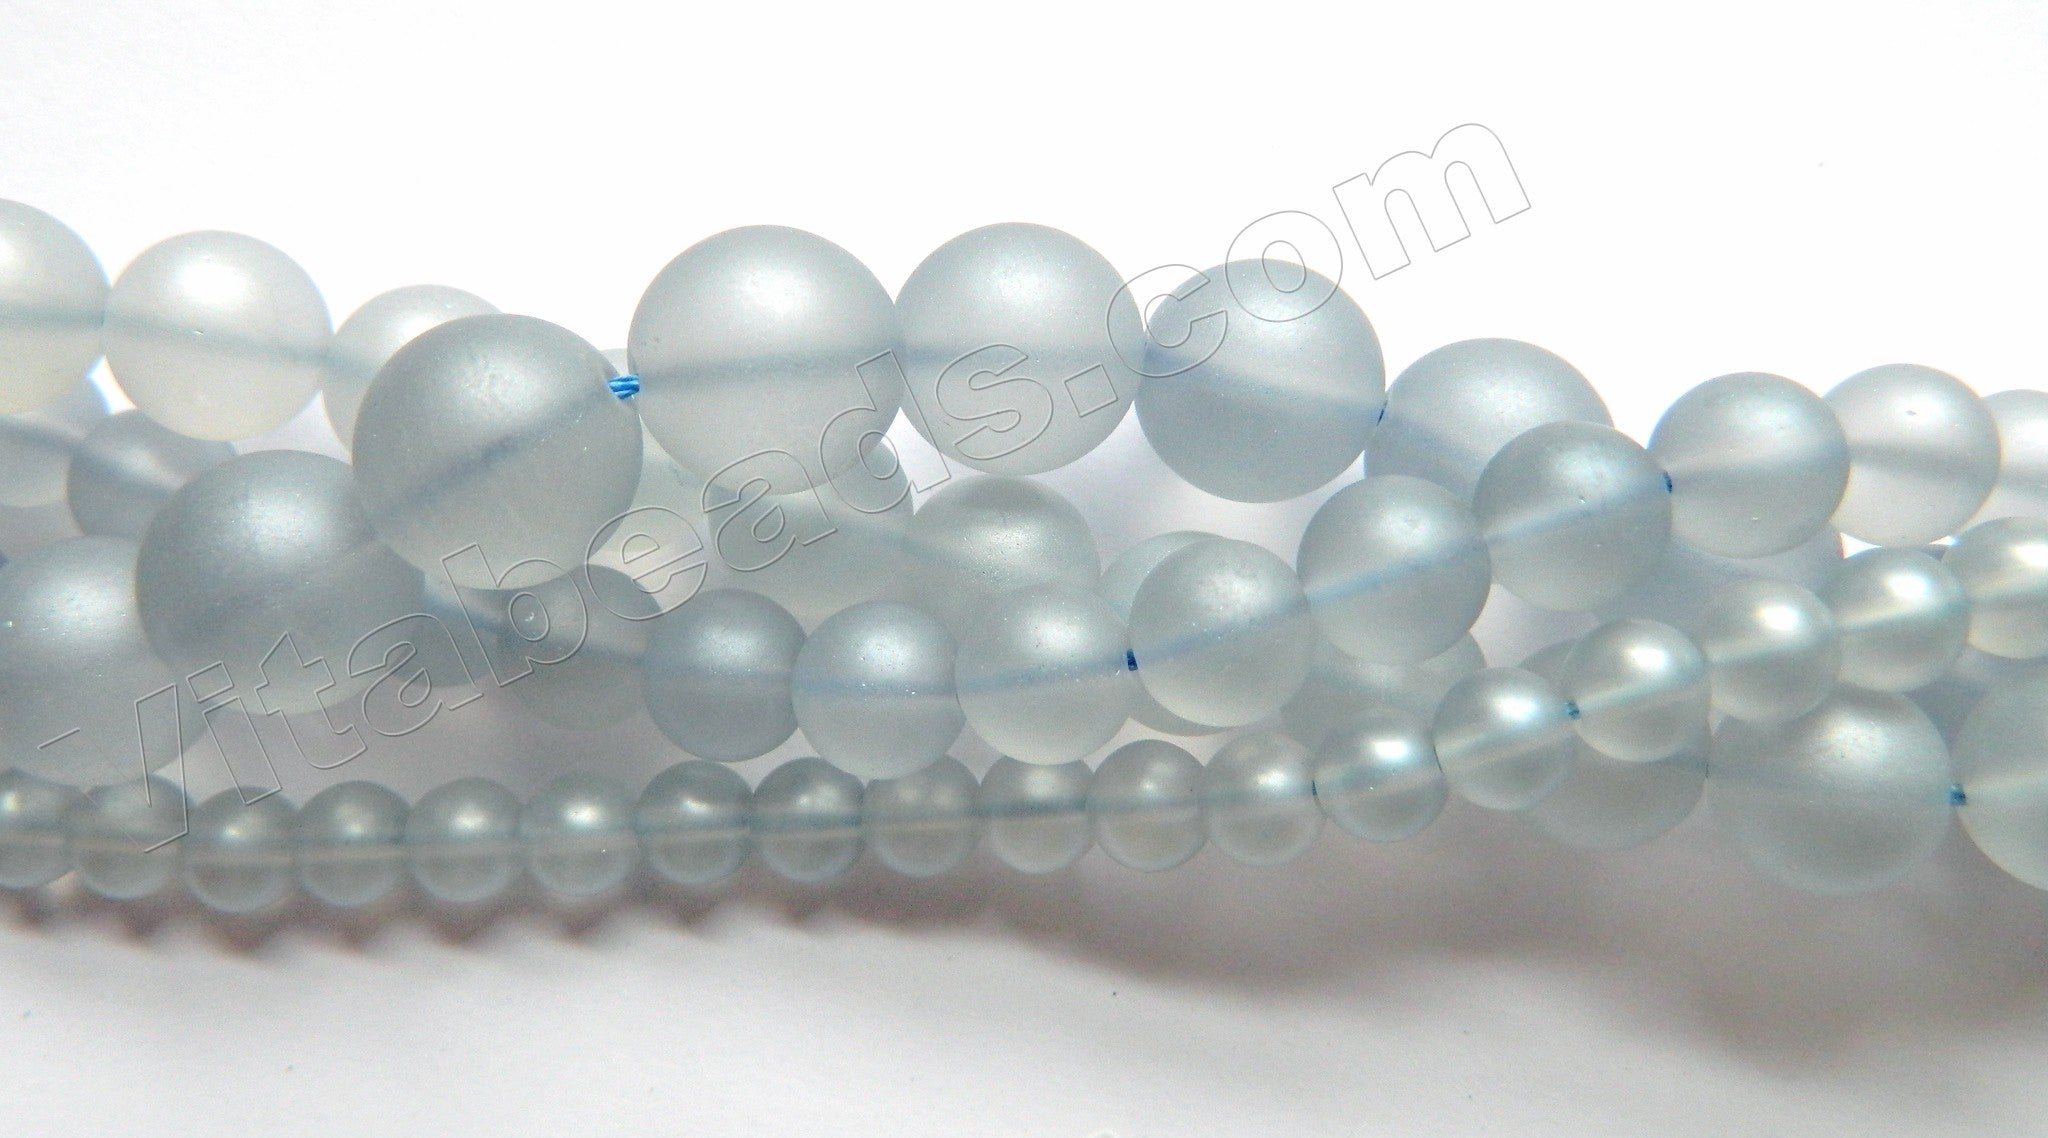 Frosted Light Sky Blue Crystal Quartz  -  Smooth Round  16"